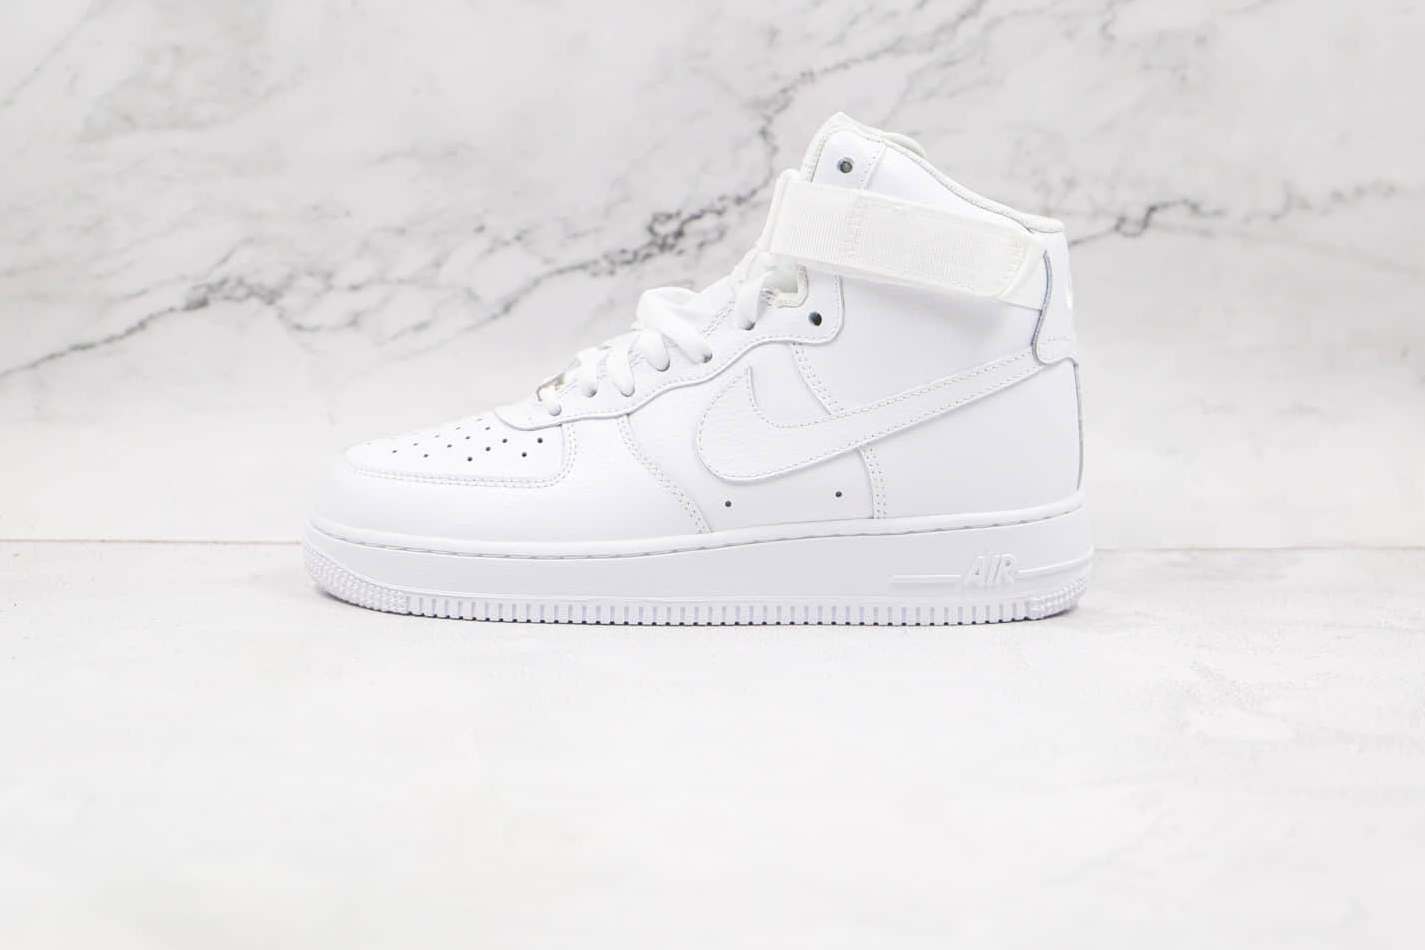 Nike Air Force 1 High '07 'White' 315121-115 - Classic Style and Comfort